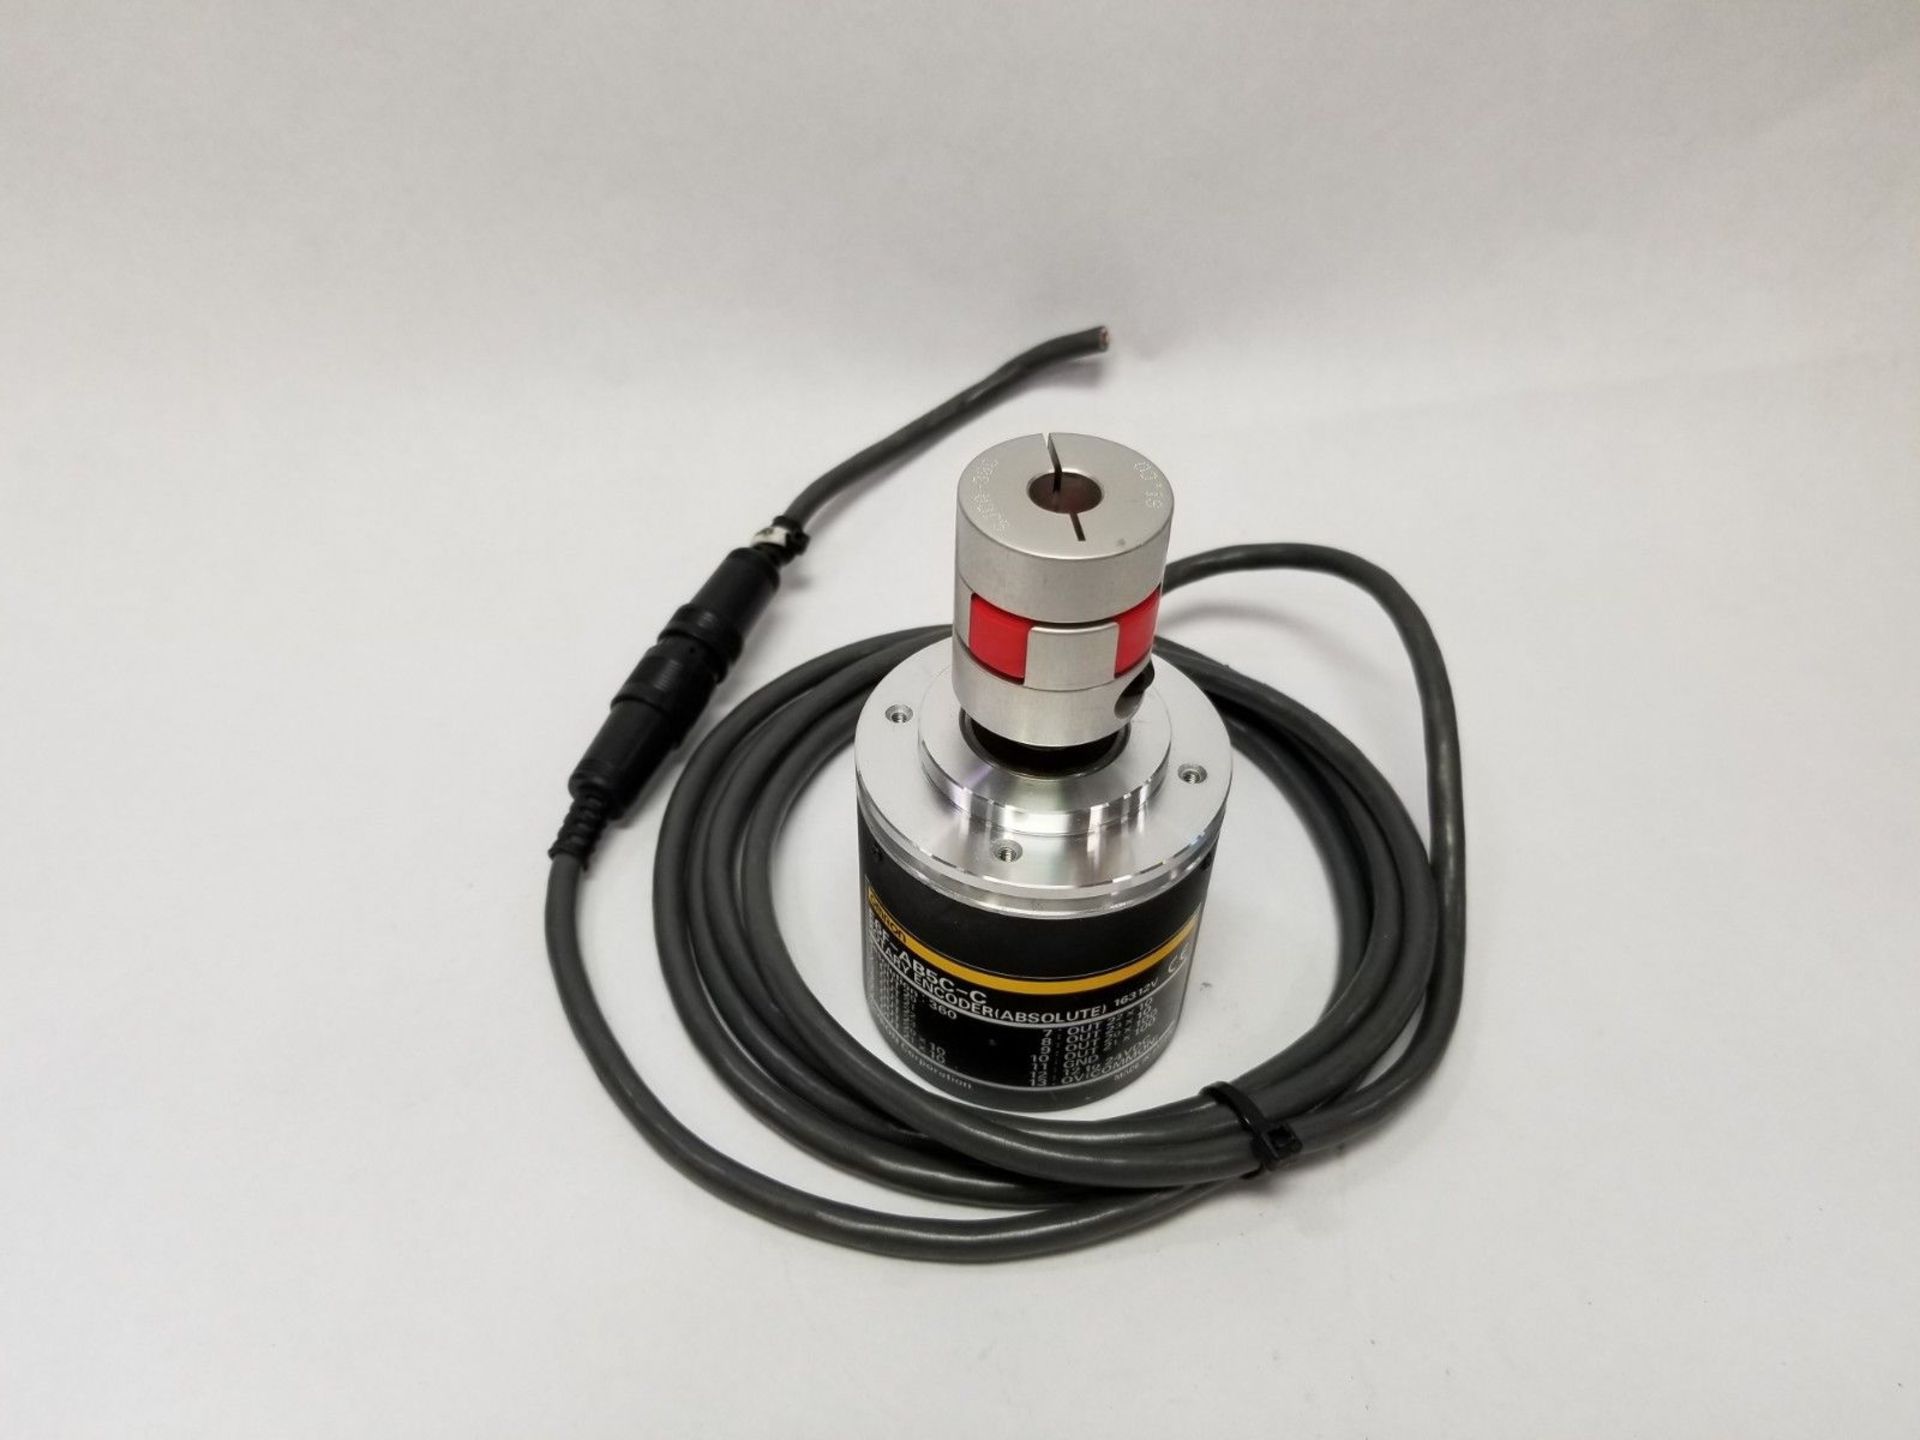 Omron Absolute Rotary Encoder